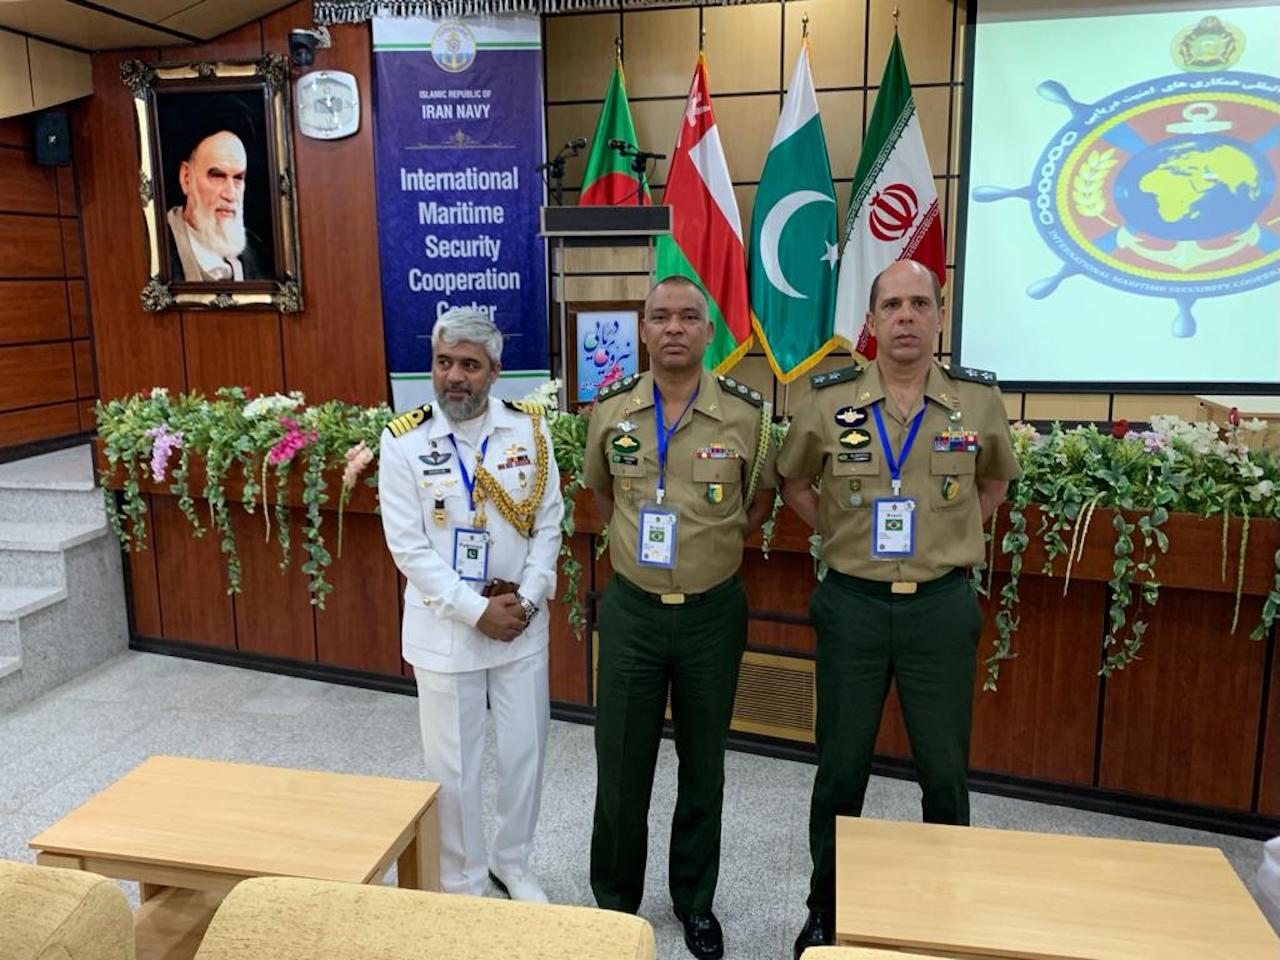 The Brazilian Embassy in Iran participates in the inauguration of the International Maritime Security Cooperation Center in Iran